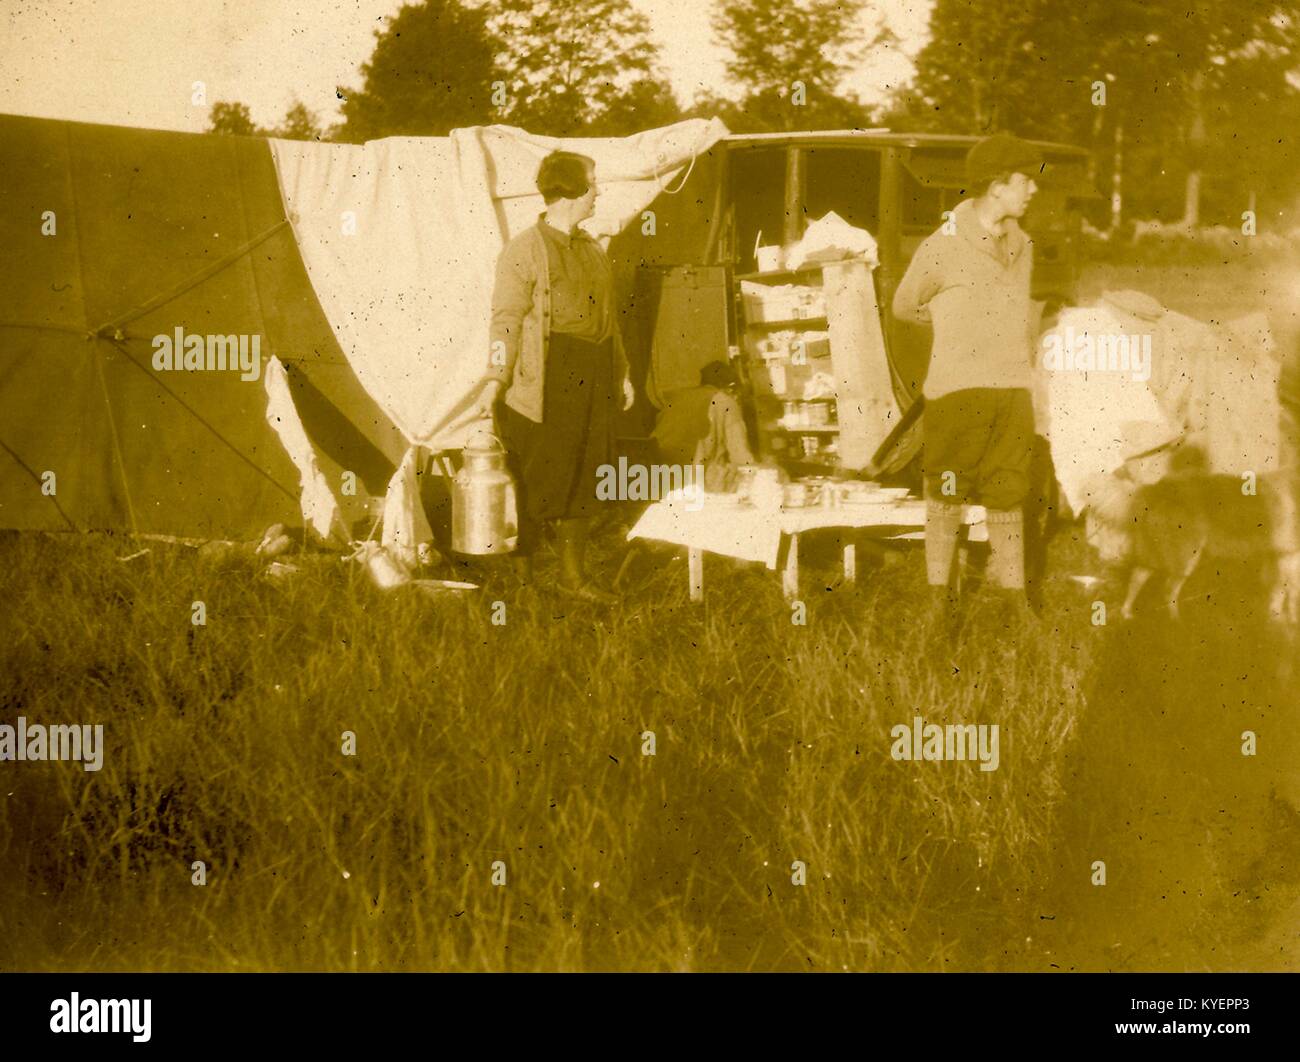 A man and woman stand at their campsite, with a tent and their automobile visible, a variety of food items in the foreground, in New Hampshire during a road trip through New England, 1925. () Stock Photo